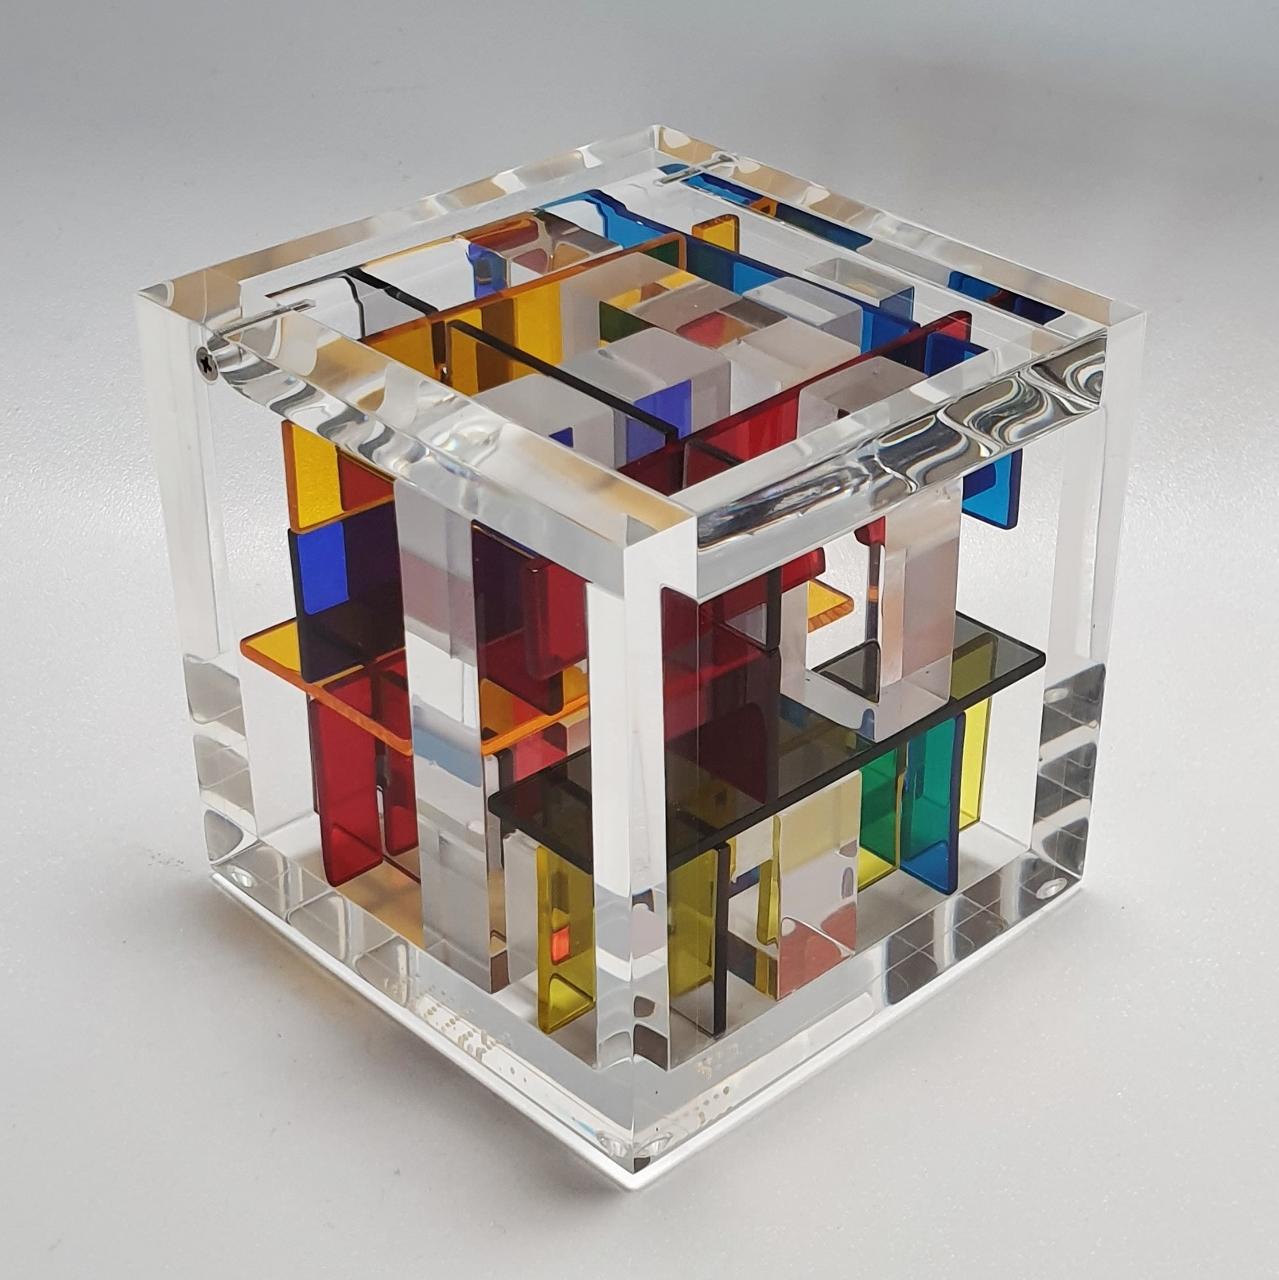 Homage to Rietveld - contemporary modern abstract geometric cube sculpture - Contemporary Sculpture by Haringa + Olijve